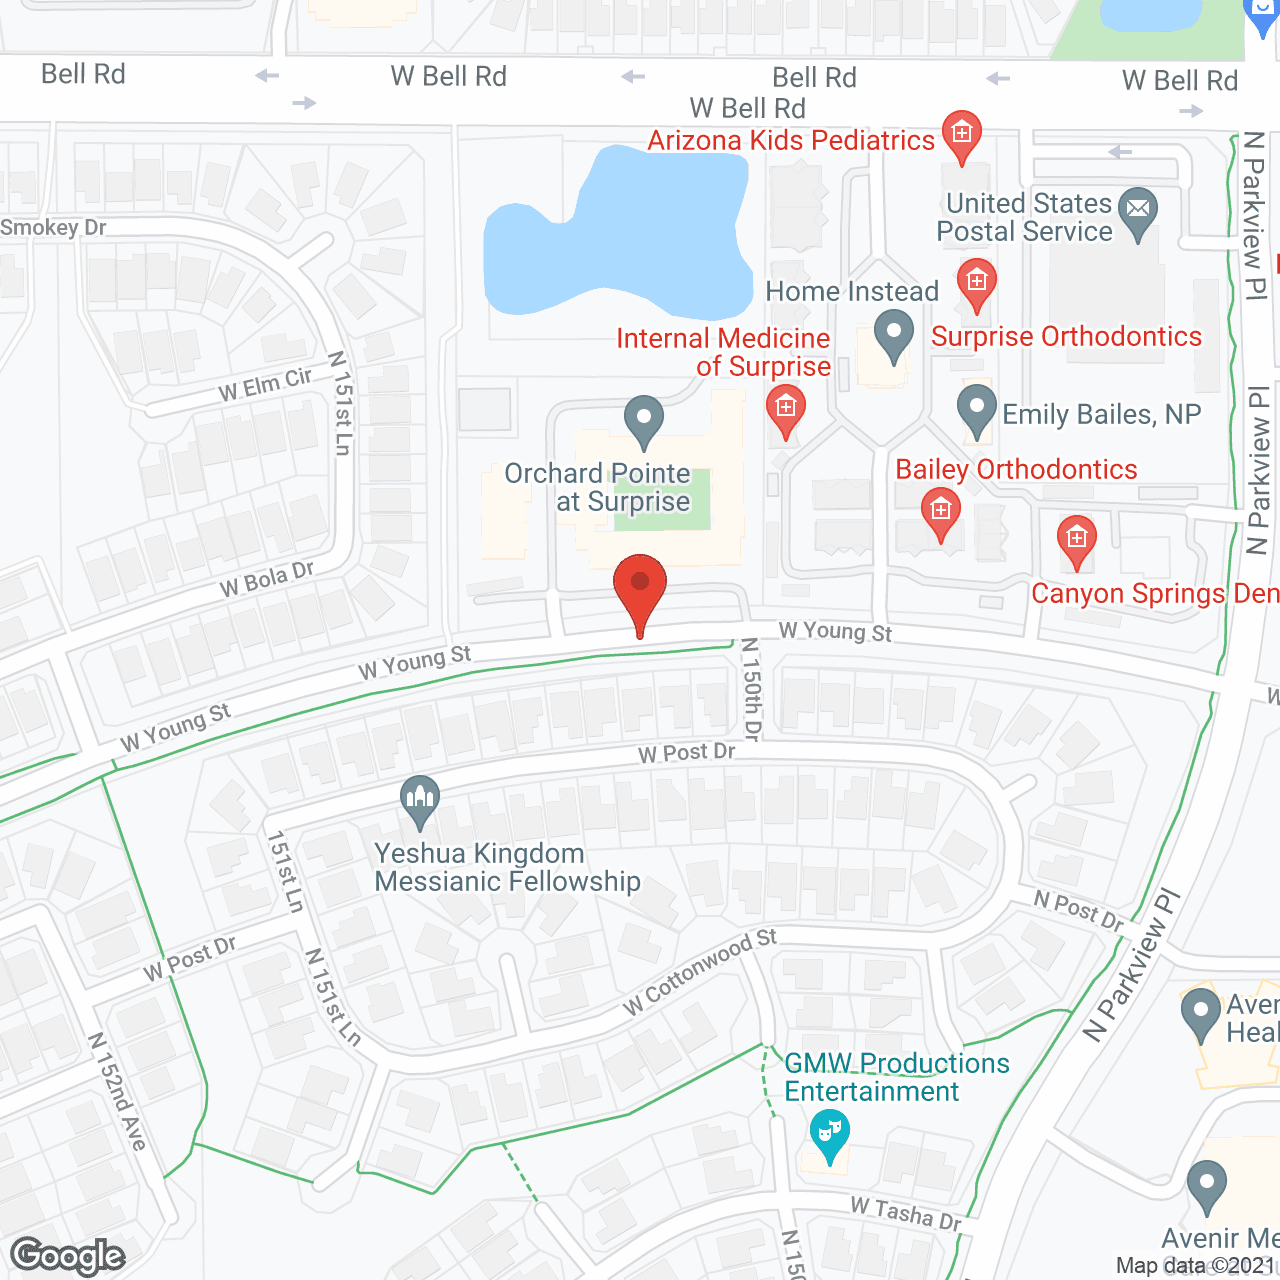 Orchard Pointe at Surprise in google map